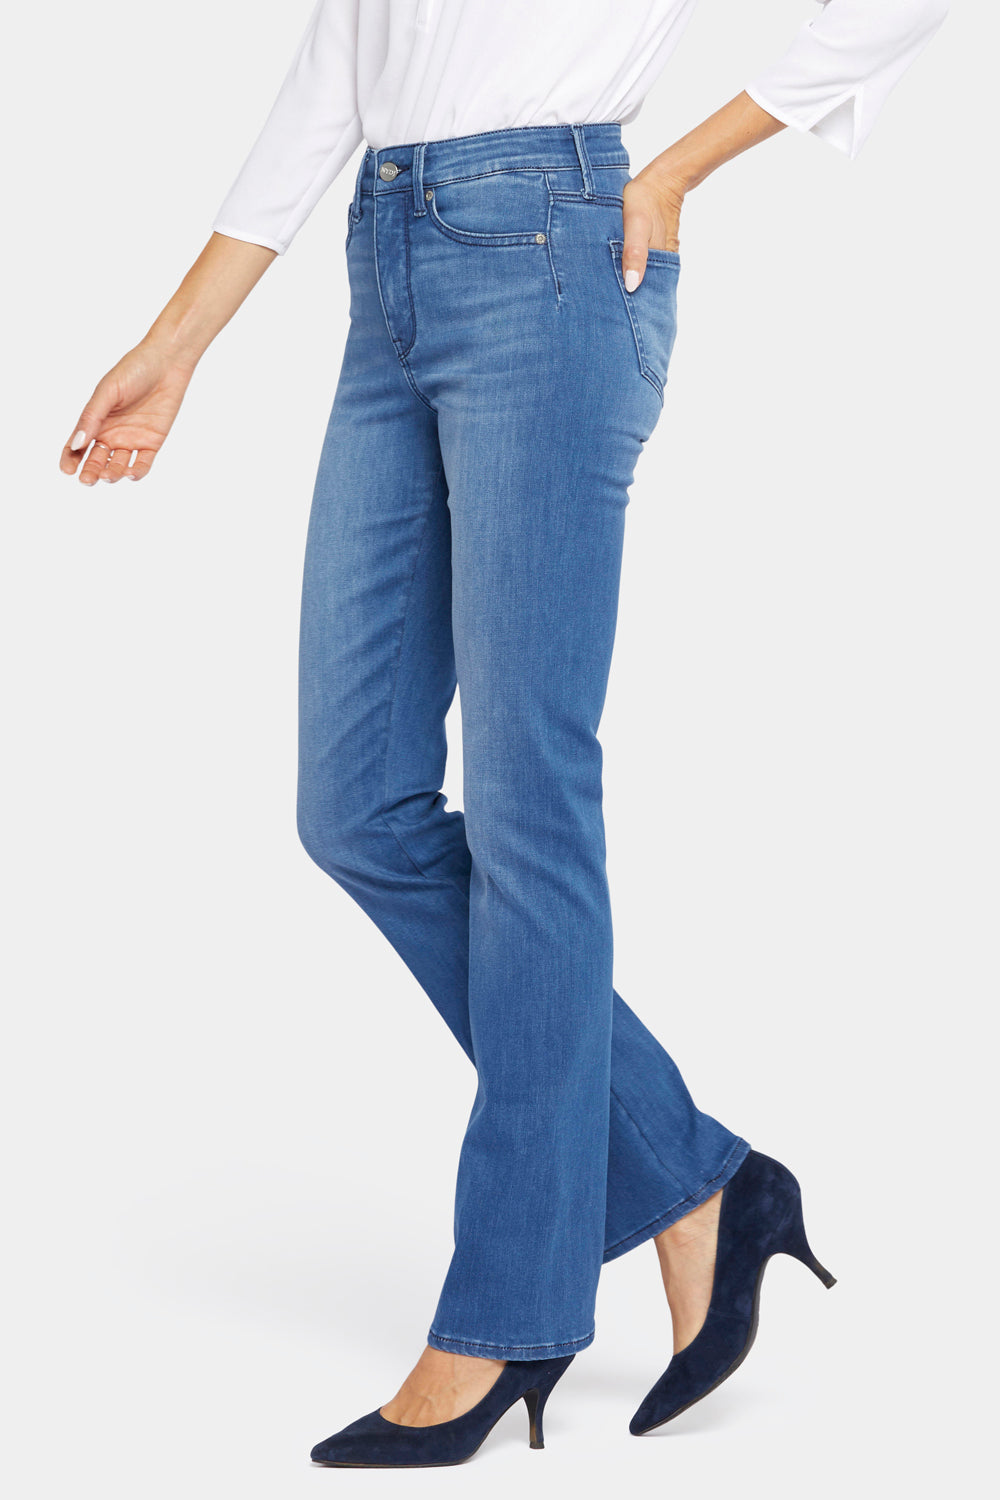 Le Silhouette Slim Bootcut Jeans In Petite - Amour